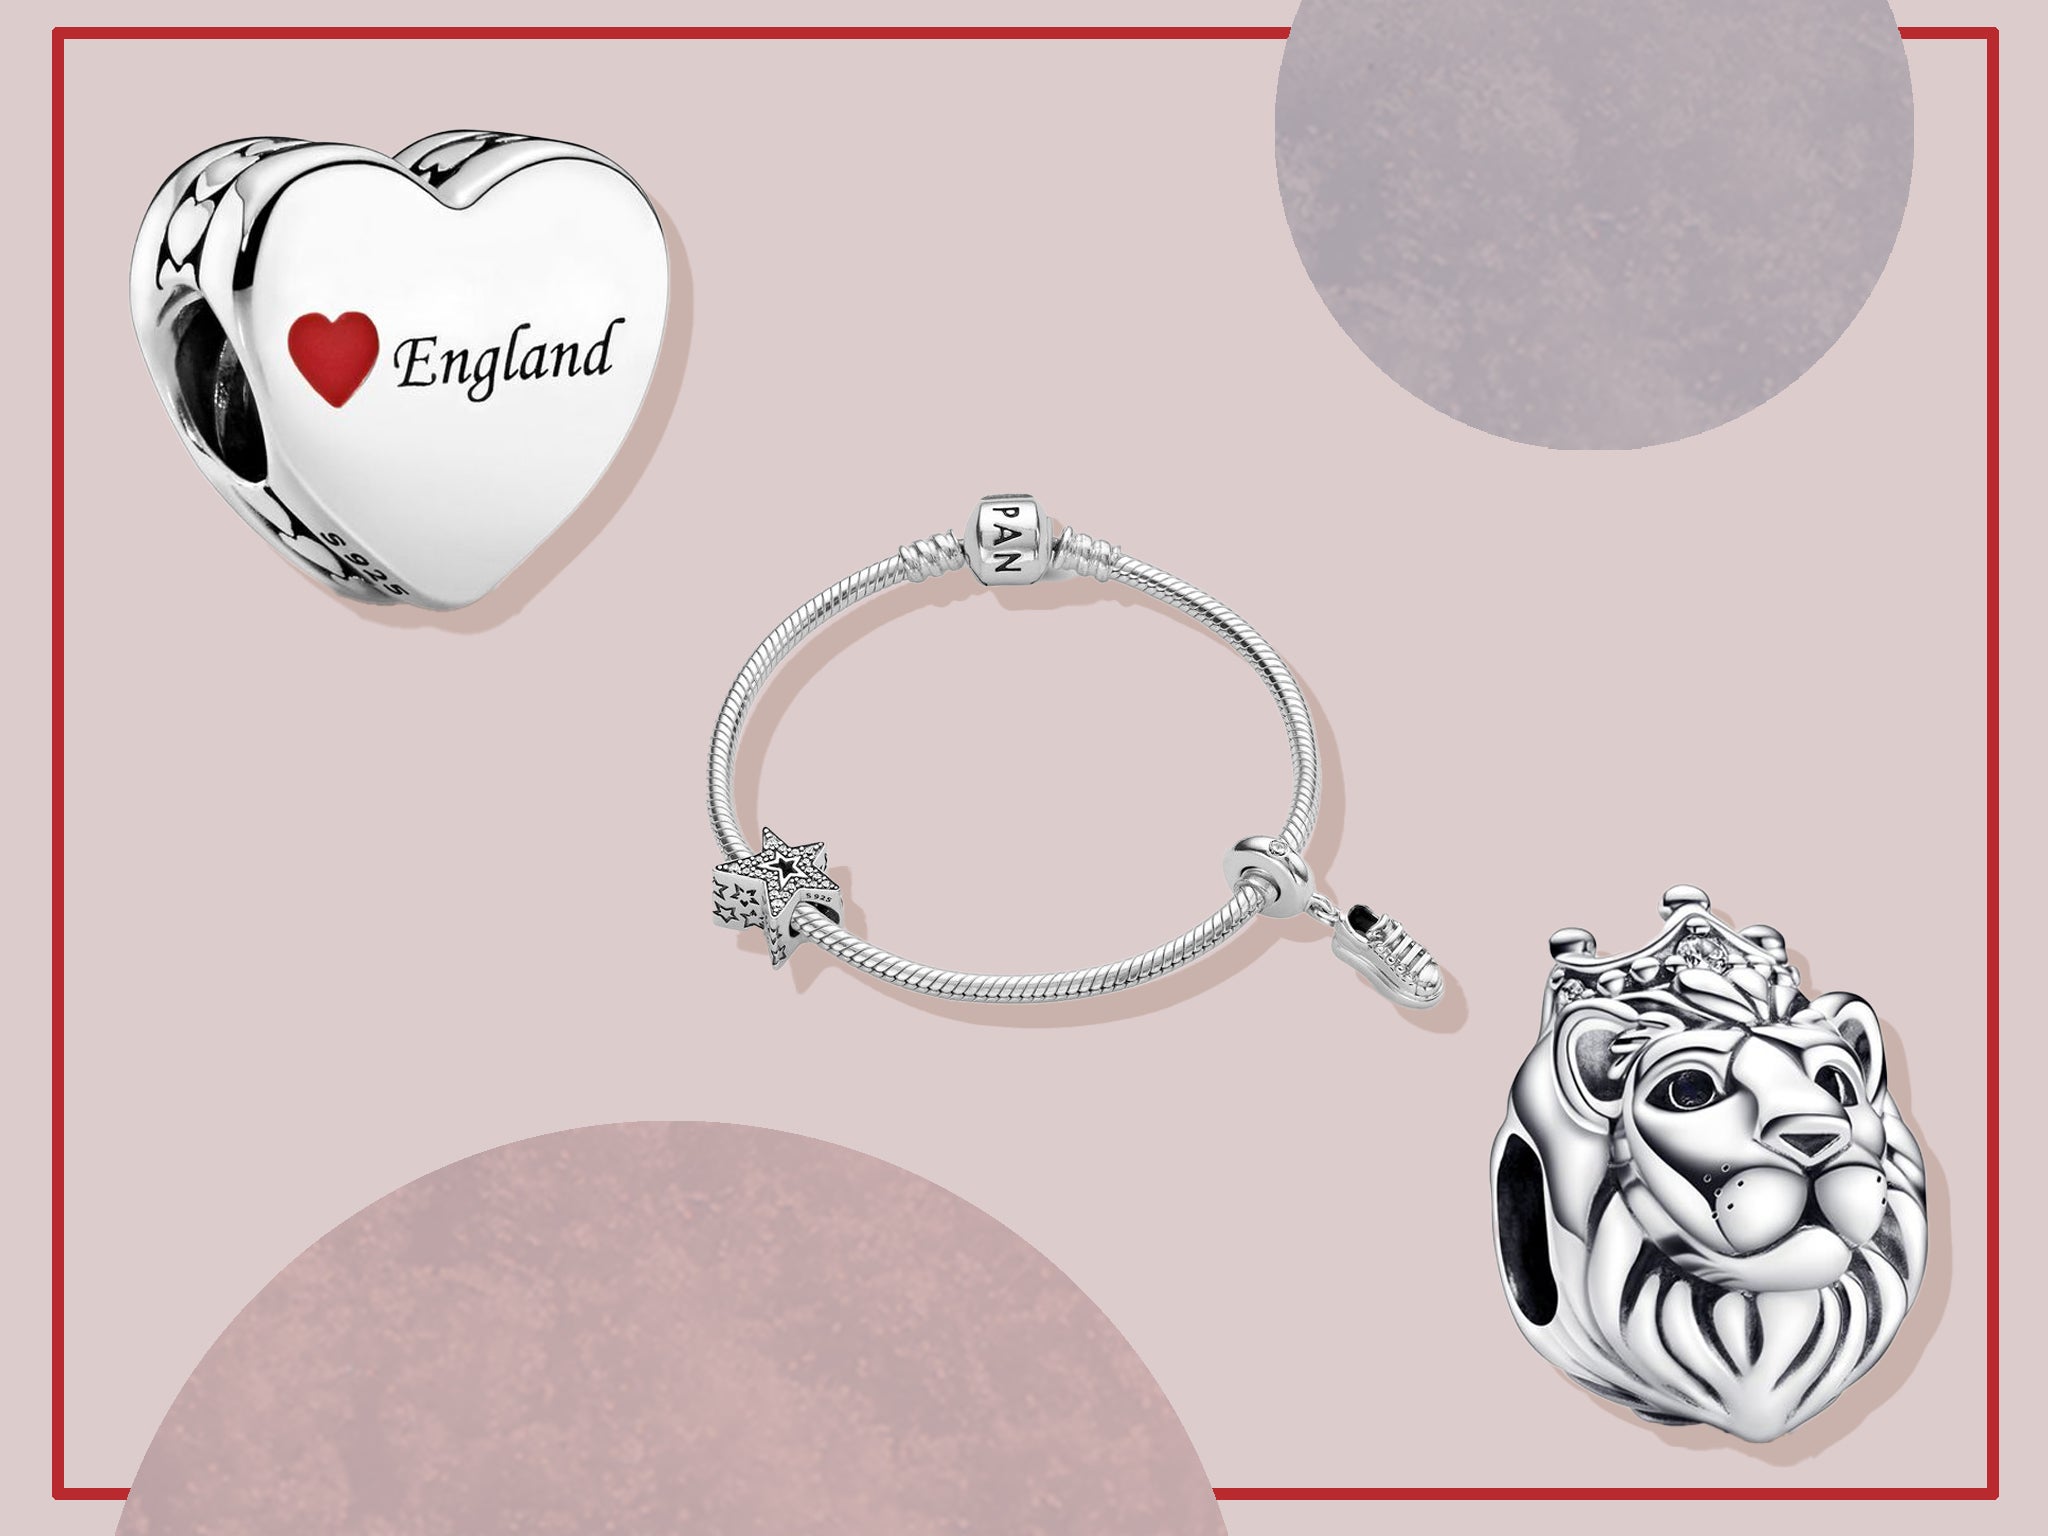 The Women's Euros 2022 Pandora collection is here with charms